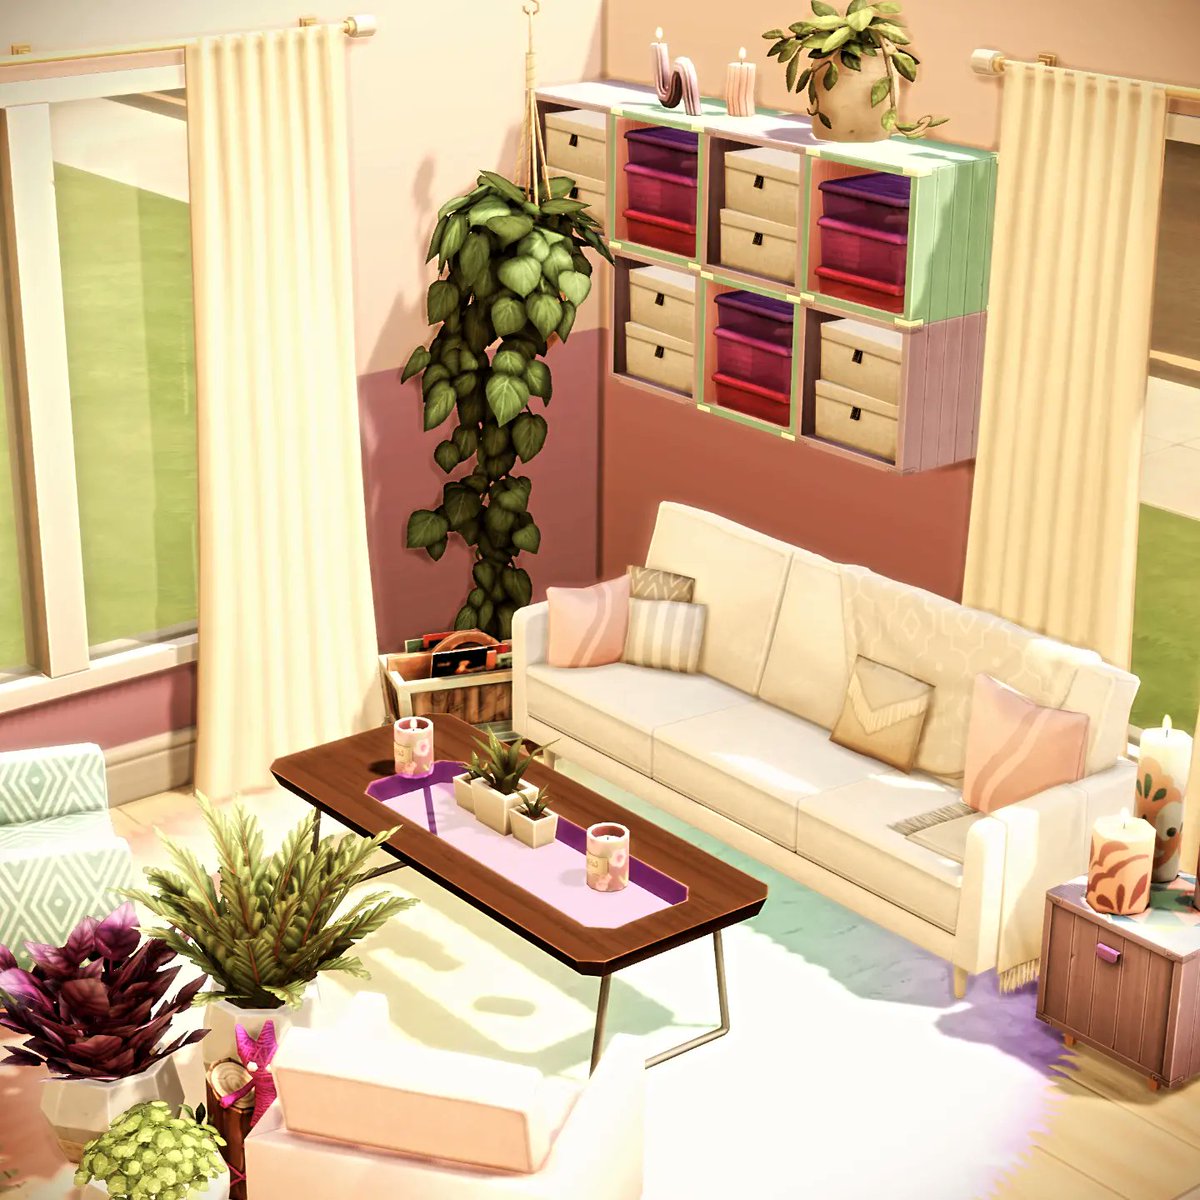 Sul sul🌼... this is the 5th Day of the awesome #9daysroomchallenge by the great @axiisims. 💝 I'd build a pastel color Living Room to hang out. Hope u like it!🌼 🌺Download in my Gallery. EA ID #Juliee86 #sims #ts4 #sims4 #ShowUsYourBuilds